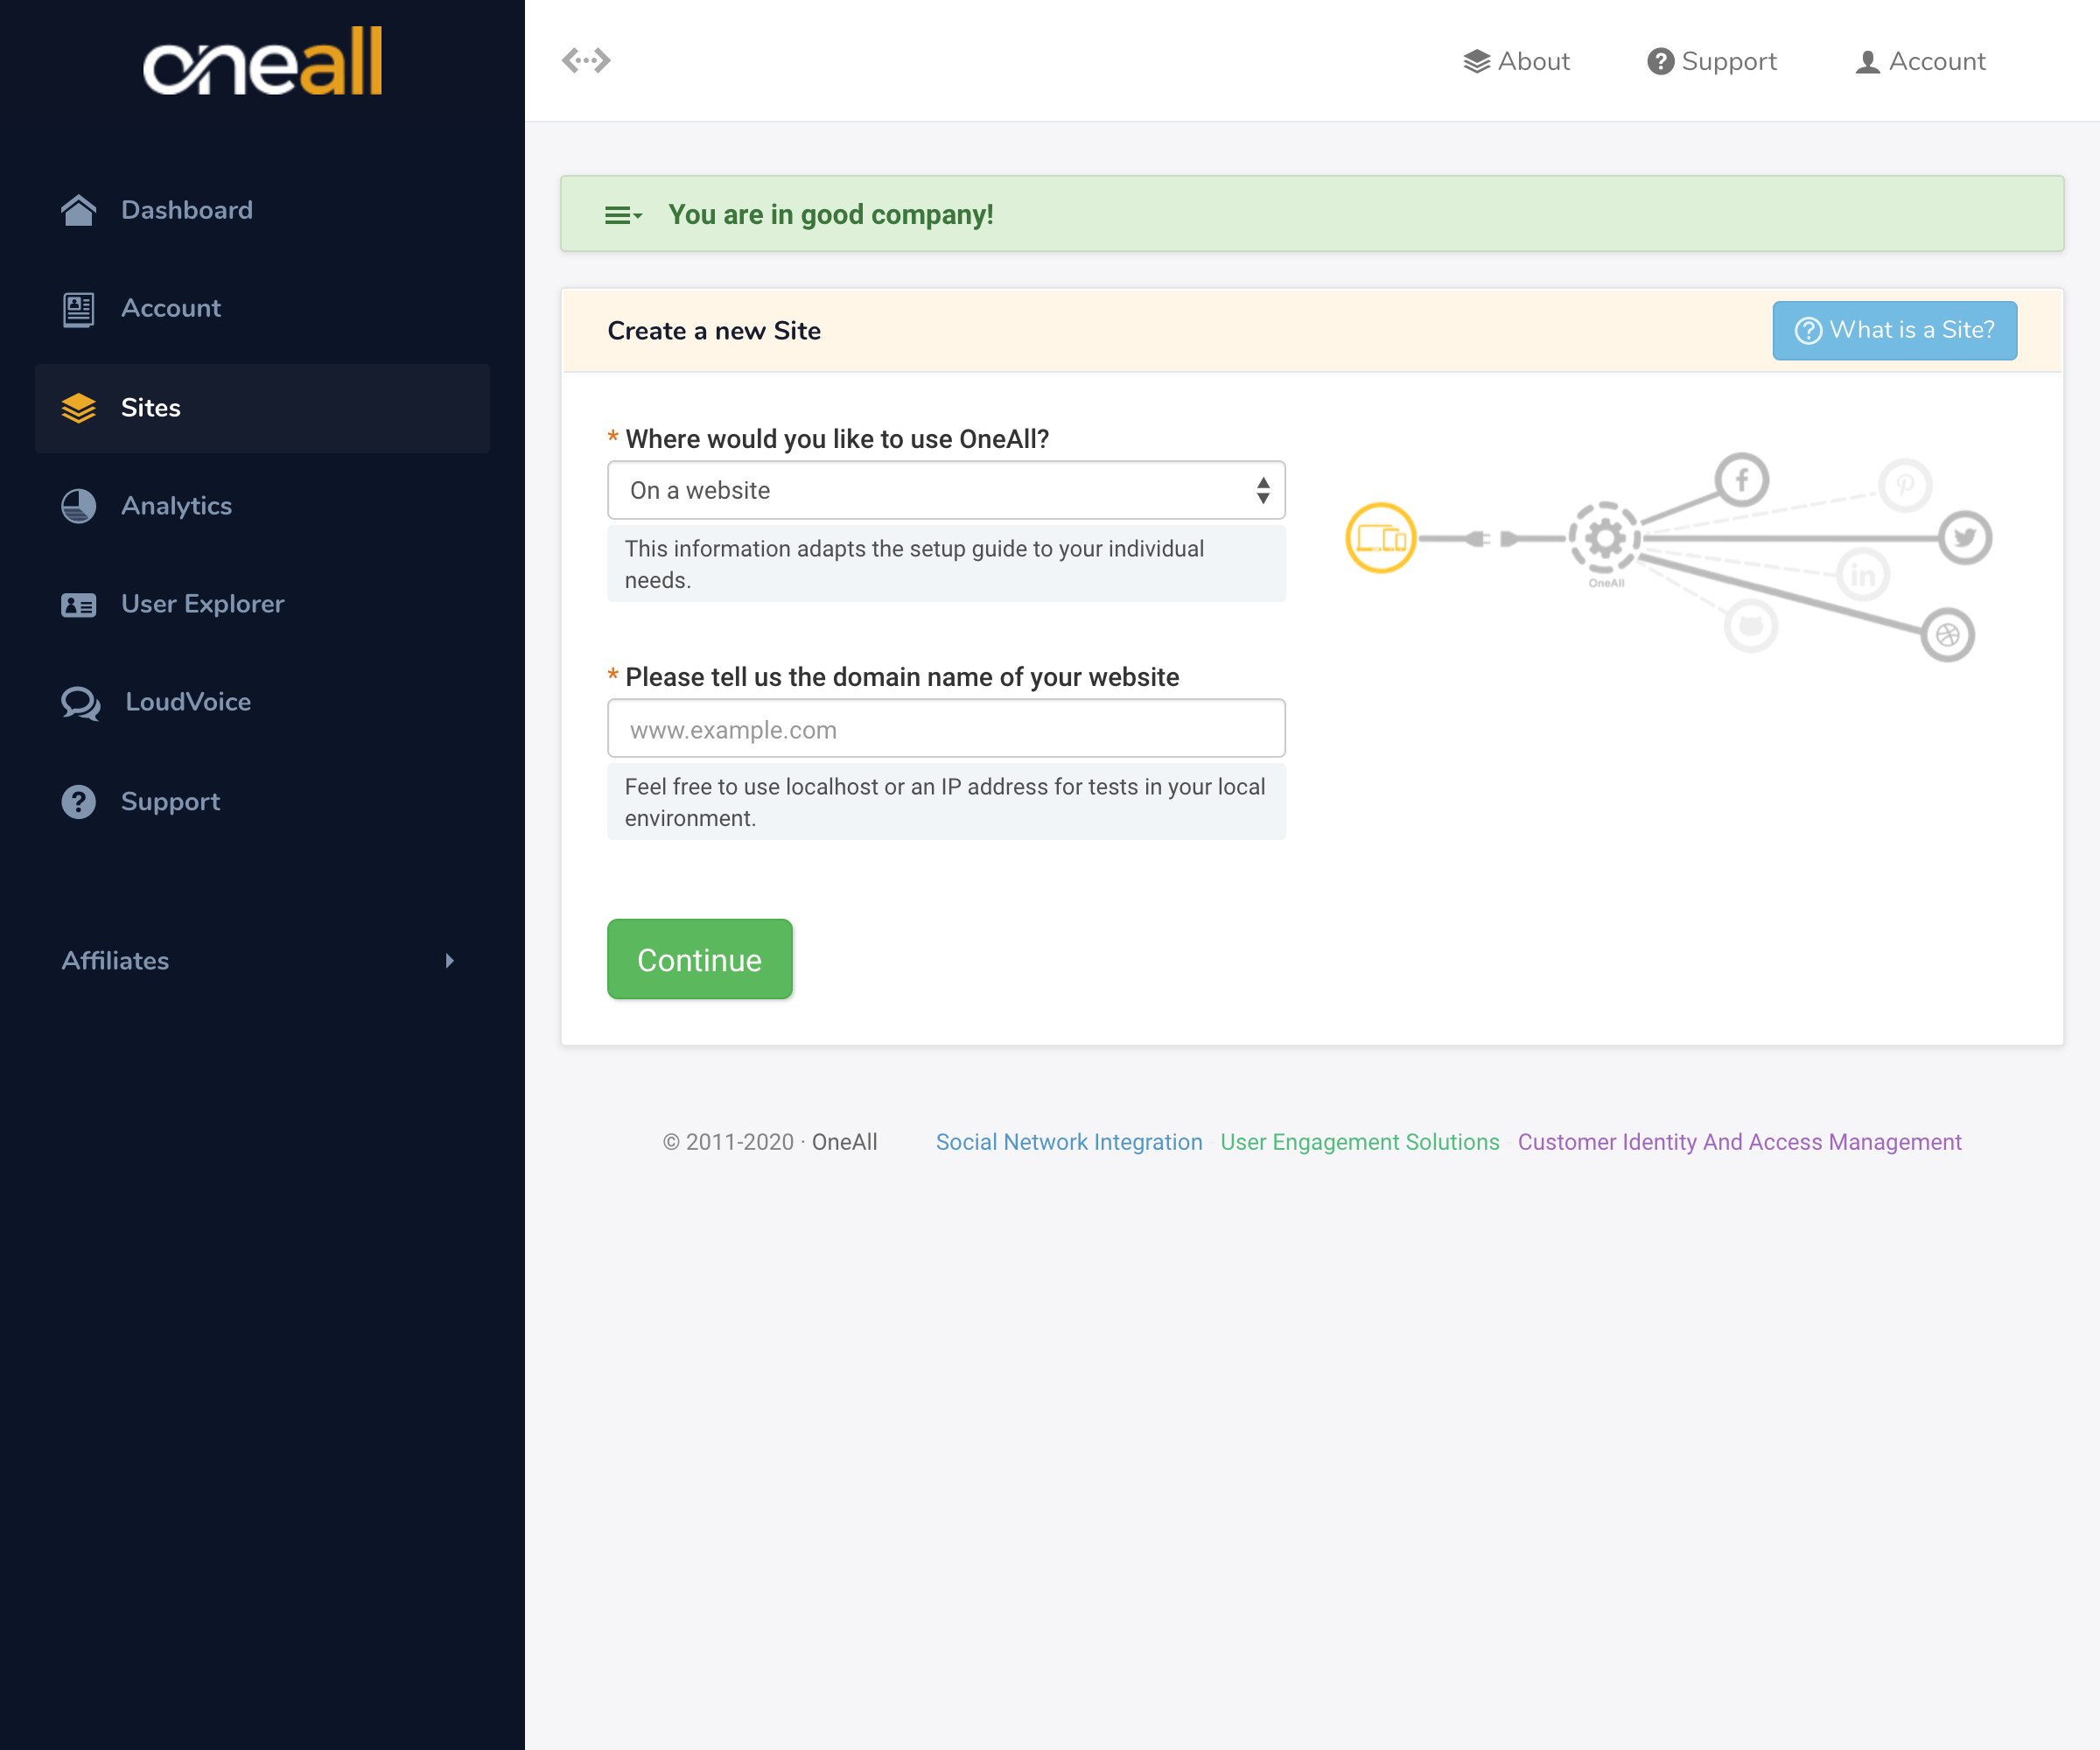 OneAll - Create a new Site